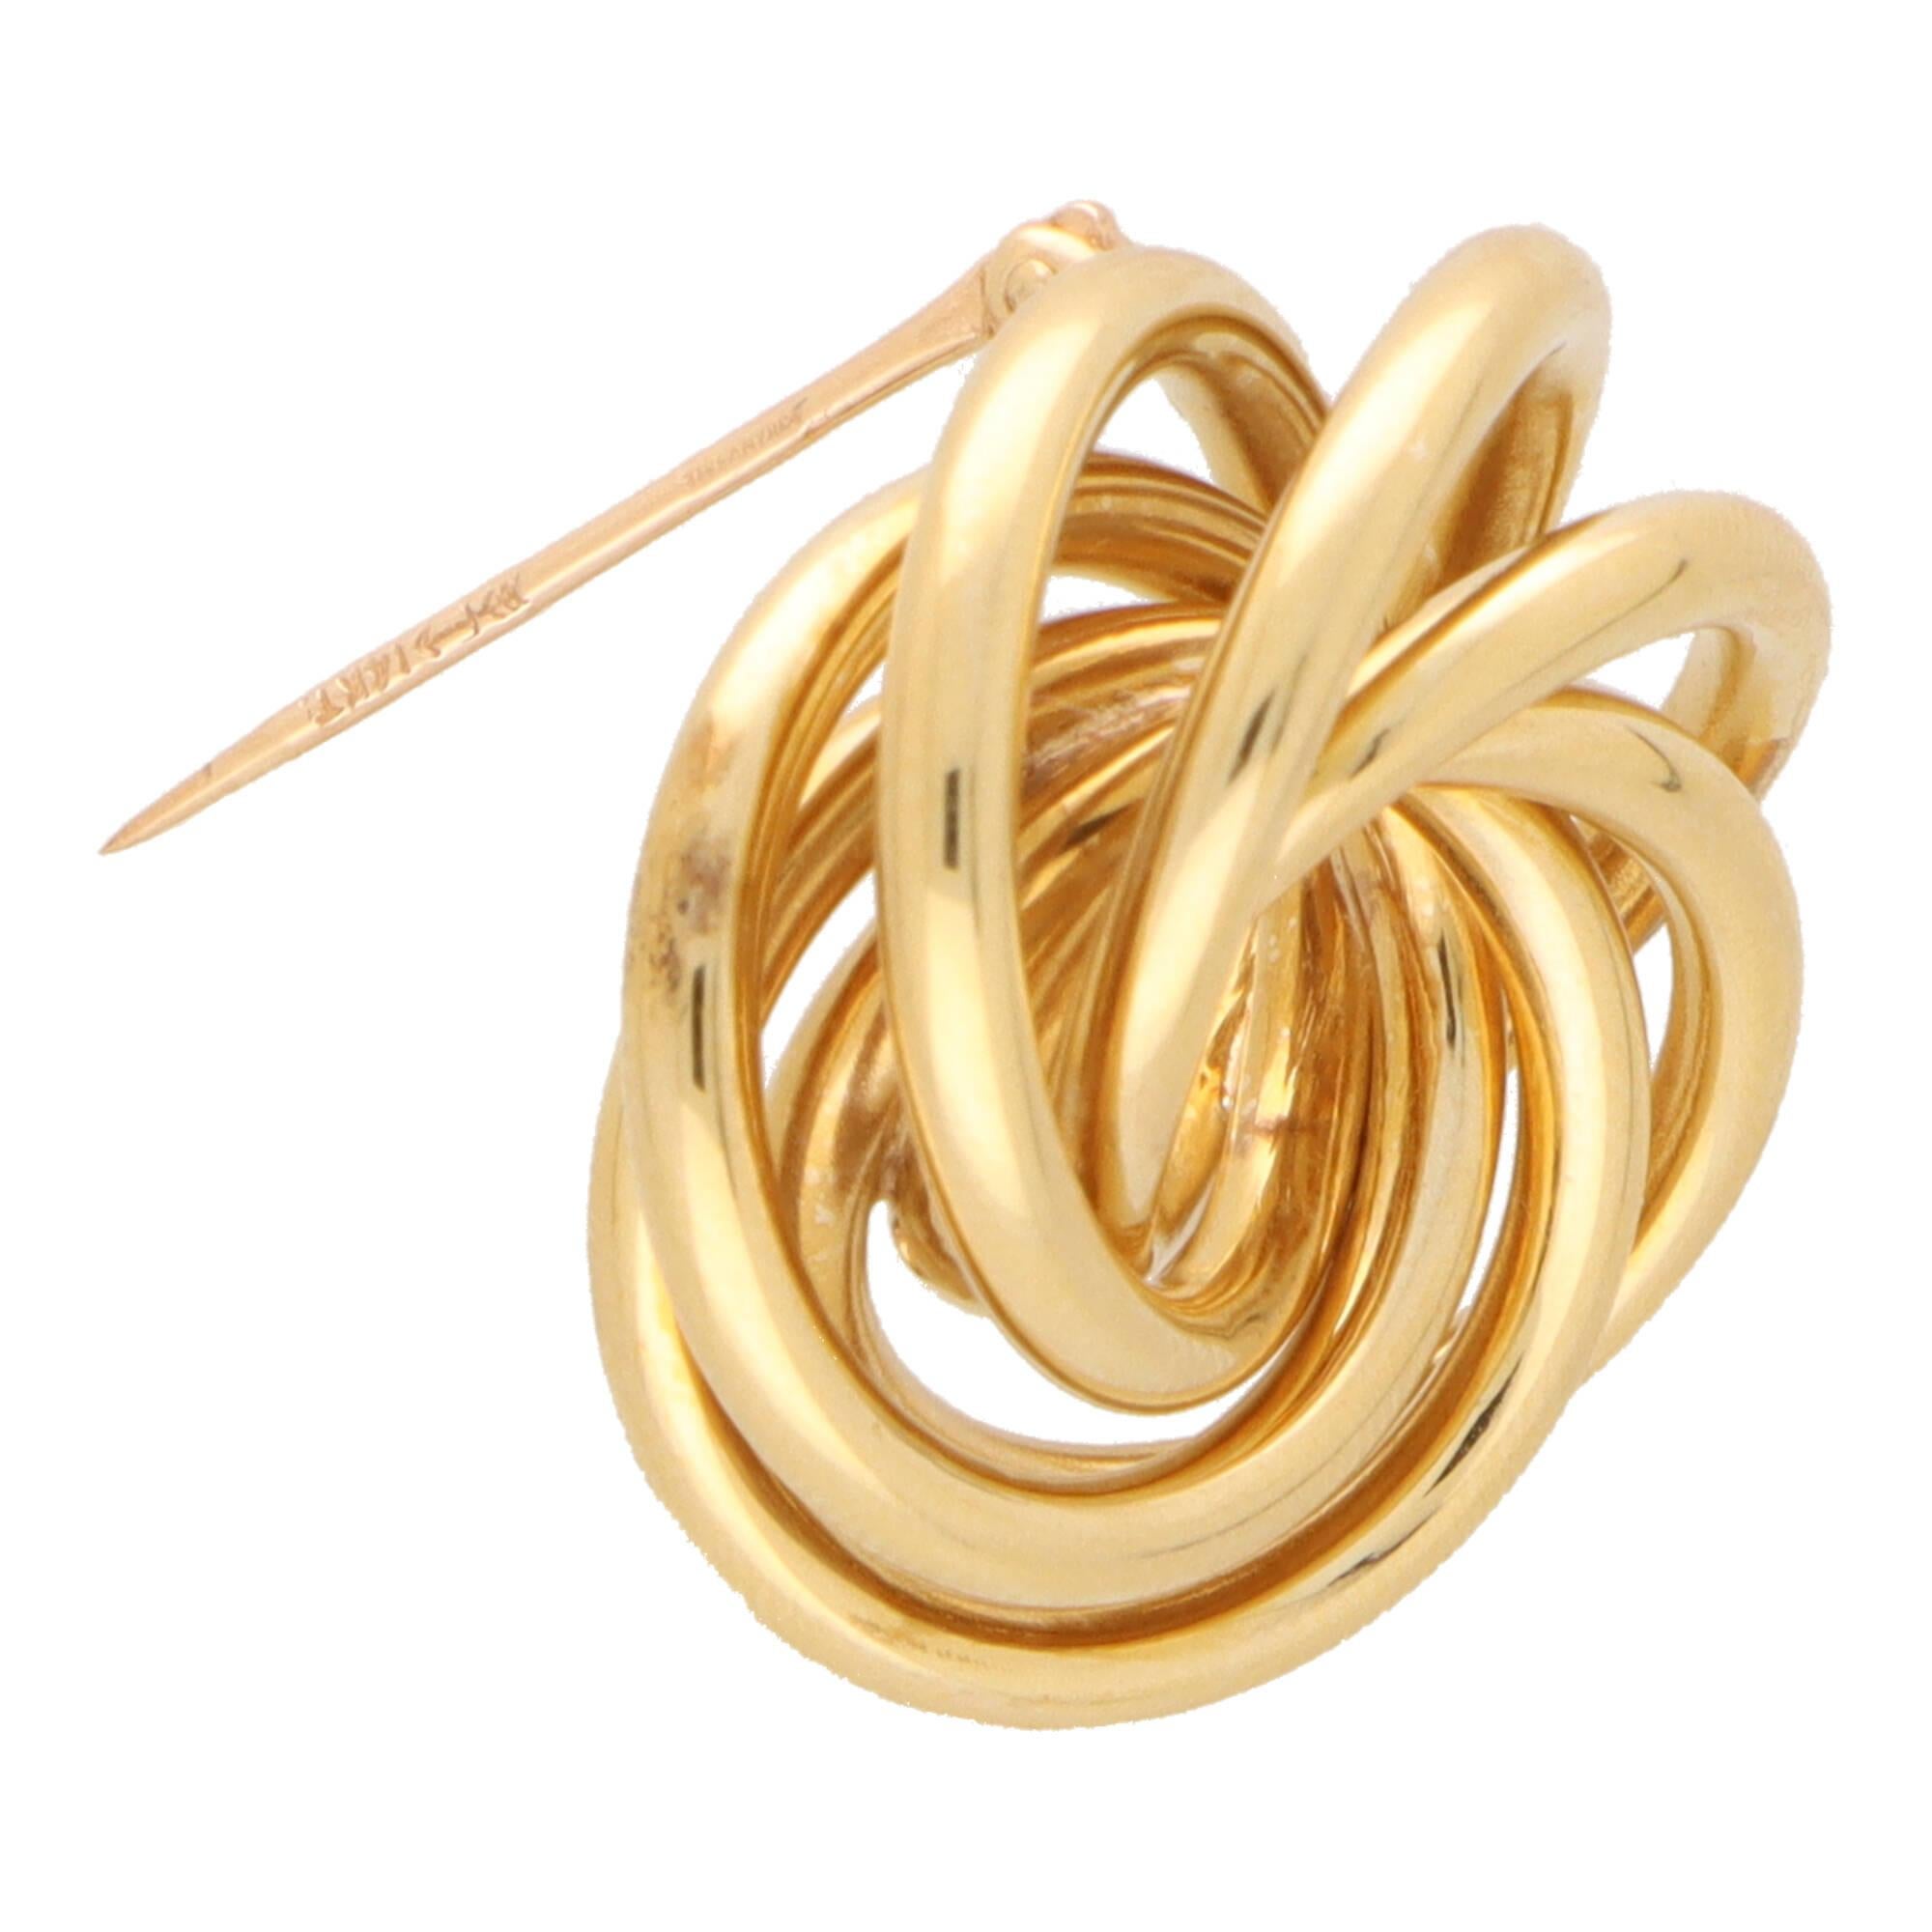 A beautiful vintage Tiffany & Co. swirl brooch set in 14k yellow gold.

The brooch is composed of a number of gold loops intertwined together to create this beautiful swirling optical illusion. It is secured to reverse with a long pin fitting.

Due